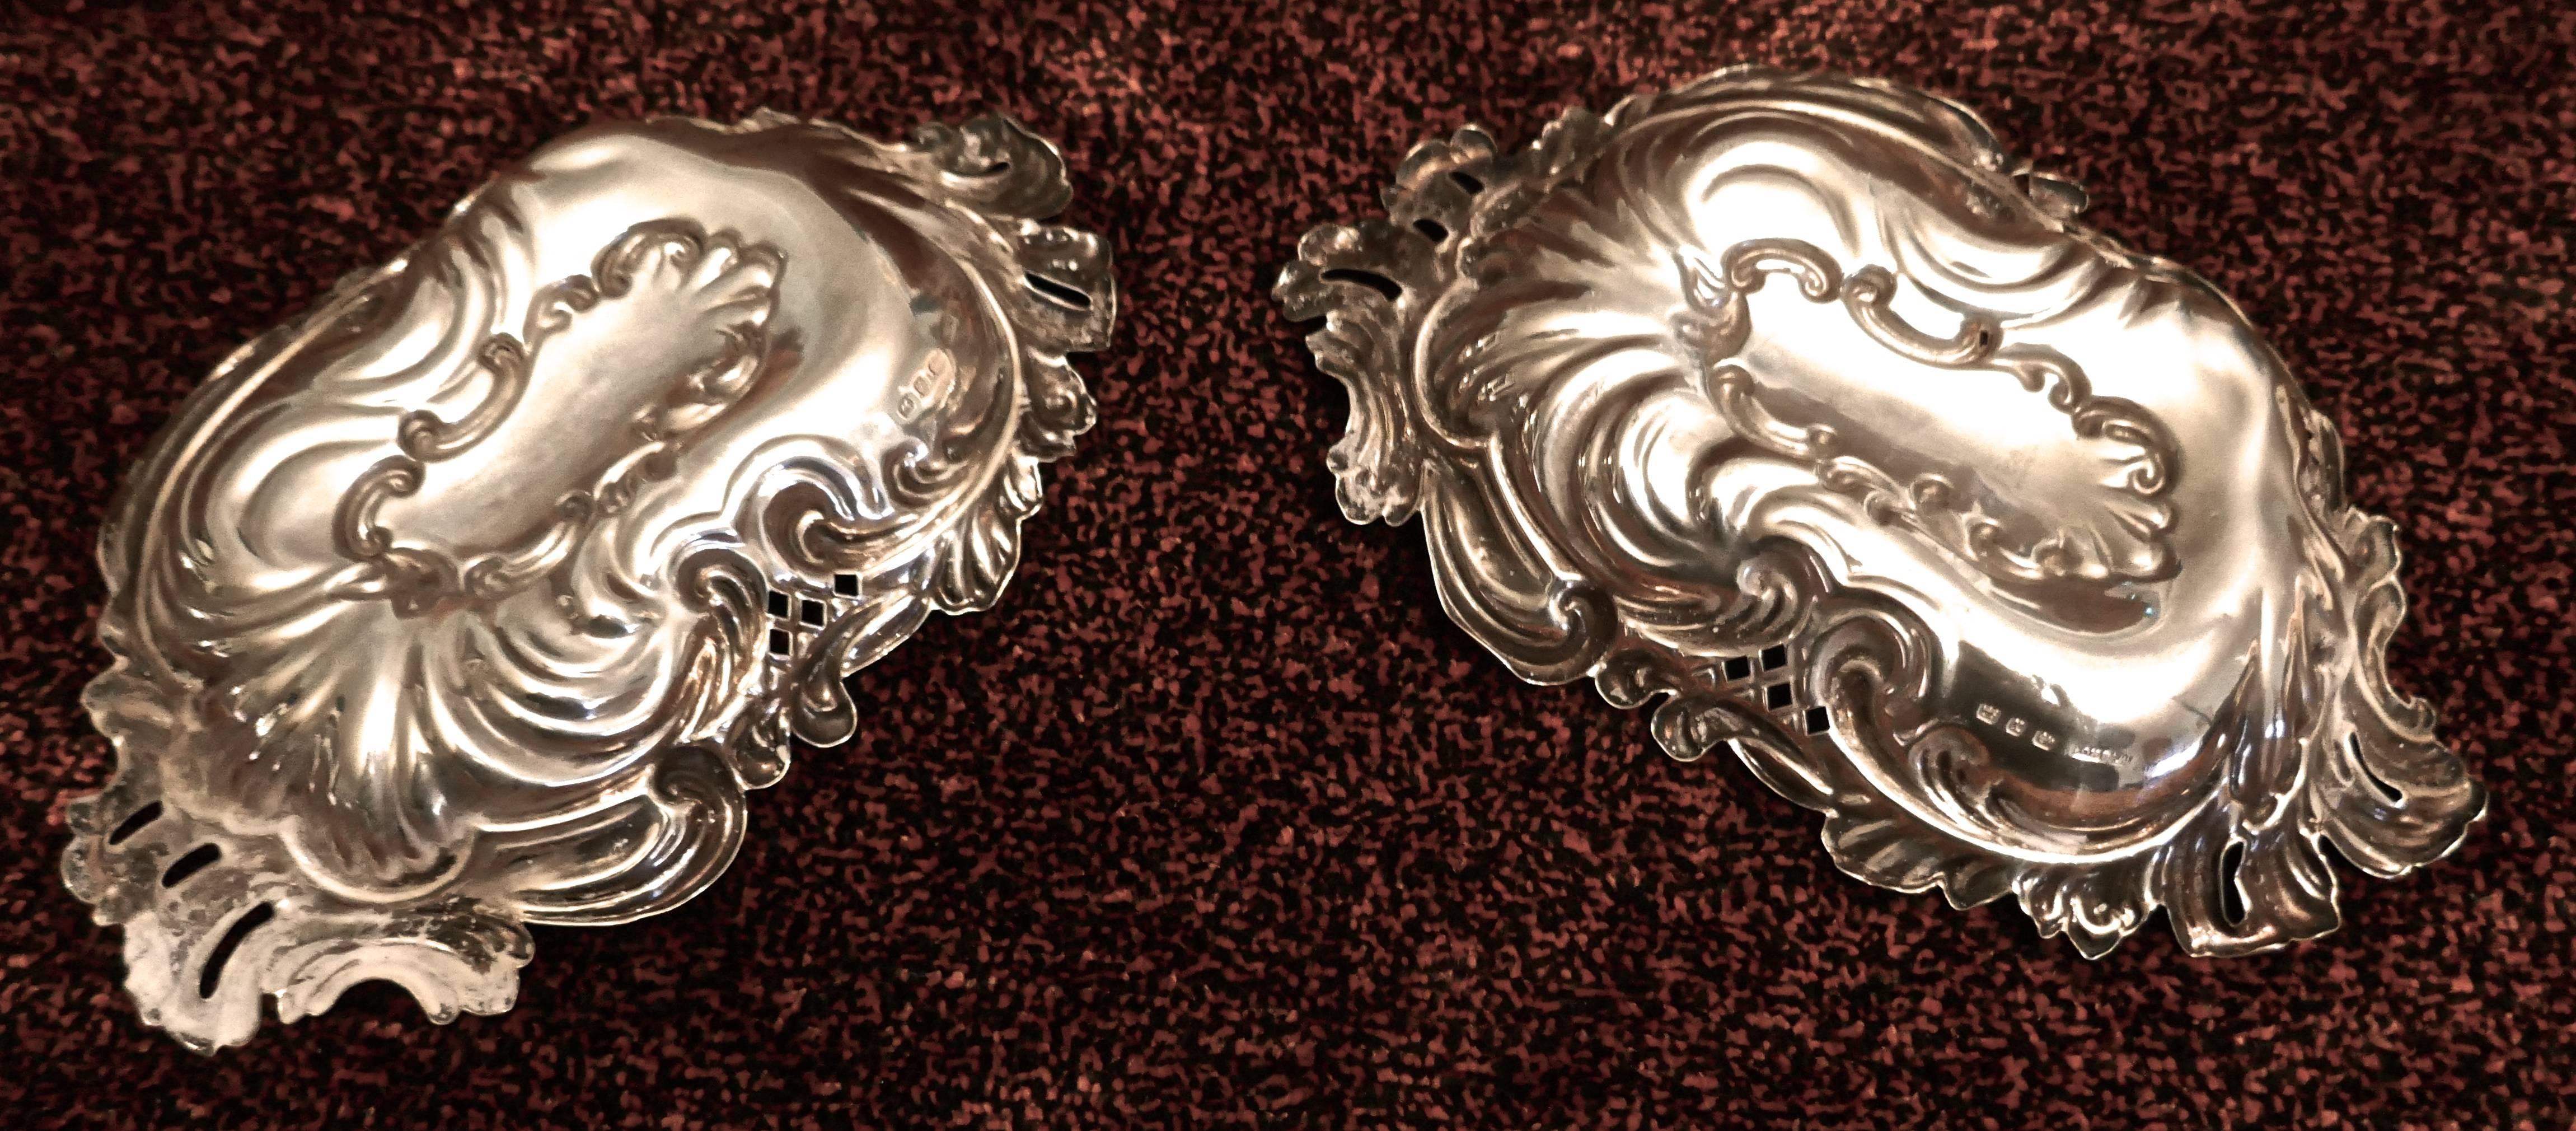 A pair of solid silver Art Nouveau sweet dishes by Mappin Brothers, 1897.

These are superb quality antique Victorian sterling silver dishes, they are in the Art Nouveau style with acanthus leaves swirling outward from the centre creating a pretty